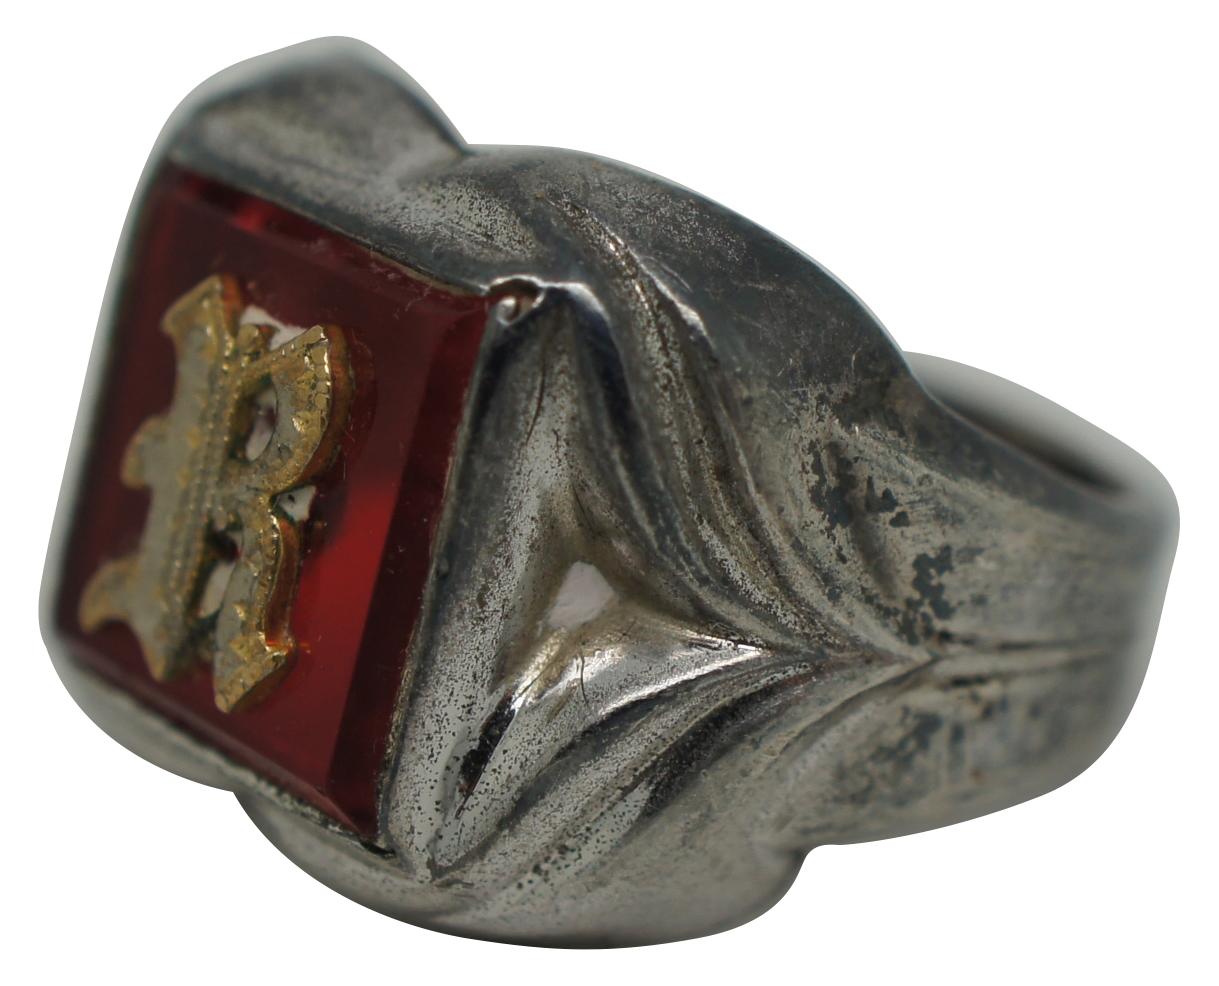 Vintage sterling silver men’s signet ring with the initial R mounted on a beveled red gemstone.

Size 7.75 / Setting - 0.75” x 0.625” / 7.1 g (Width x Depth/Weight).